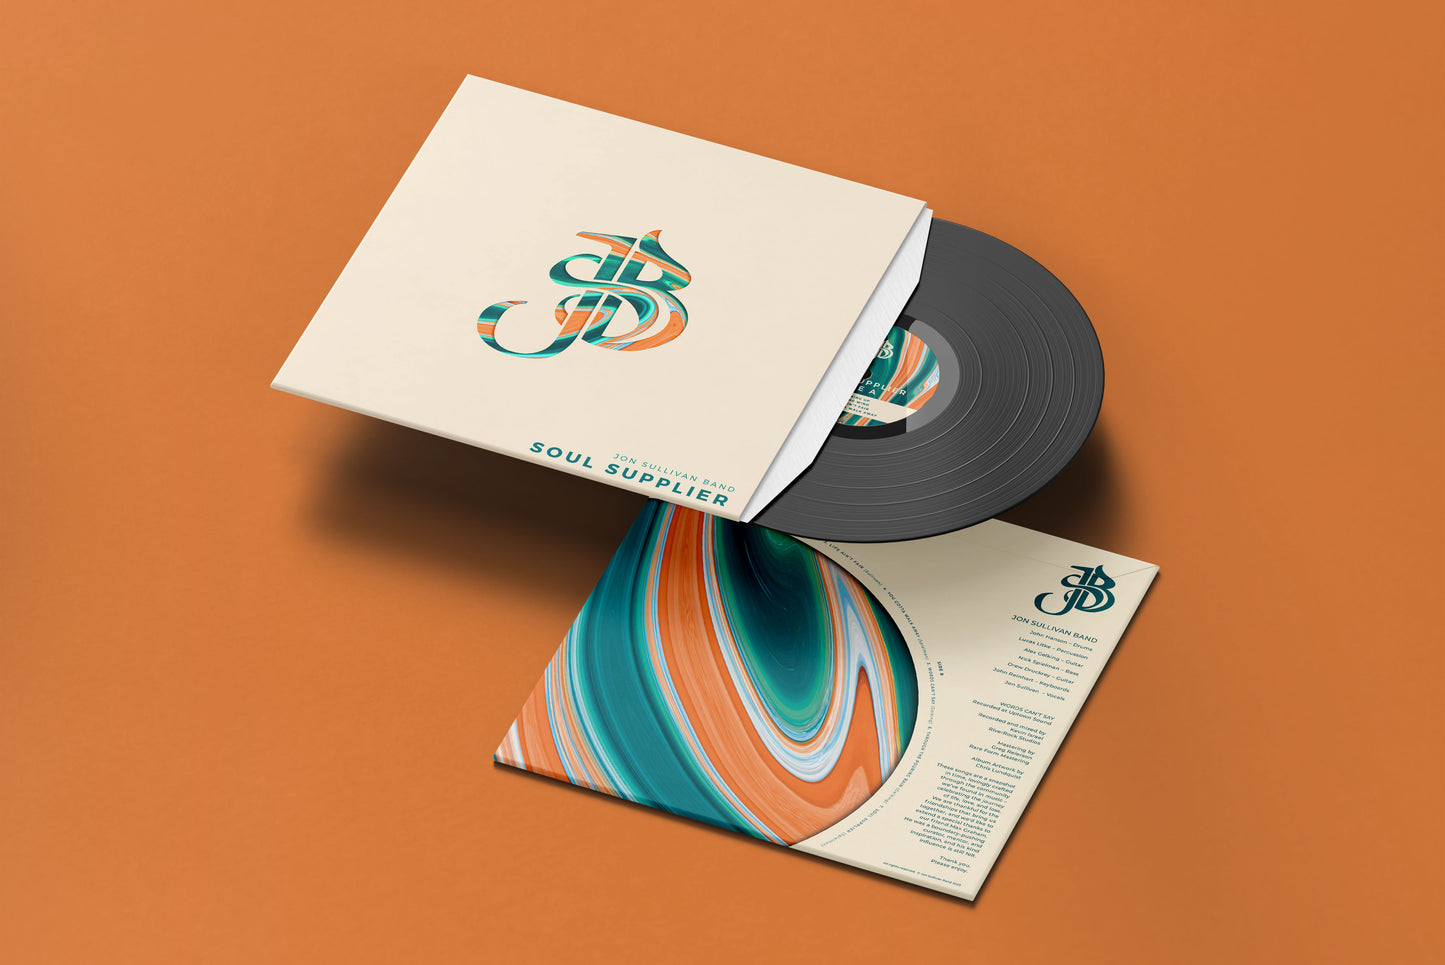 'Soul Supplier' Vinyl with Digital Download Included